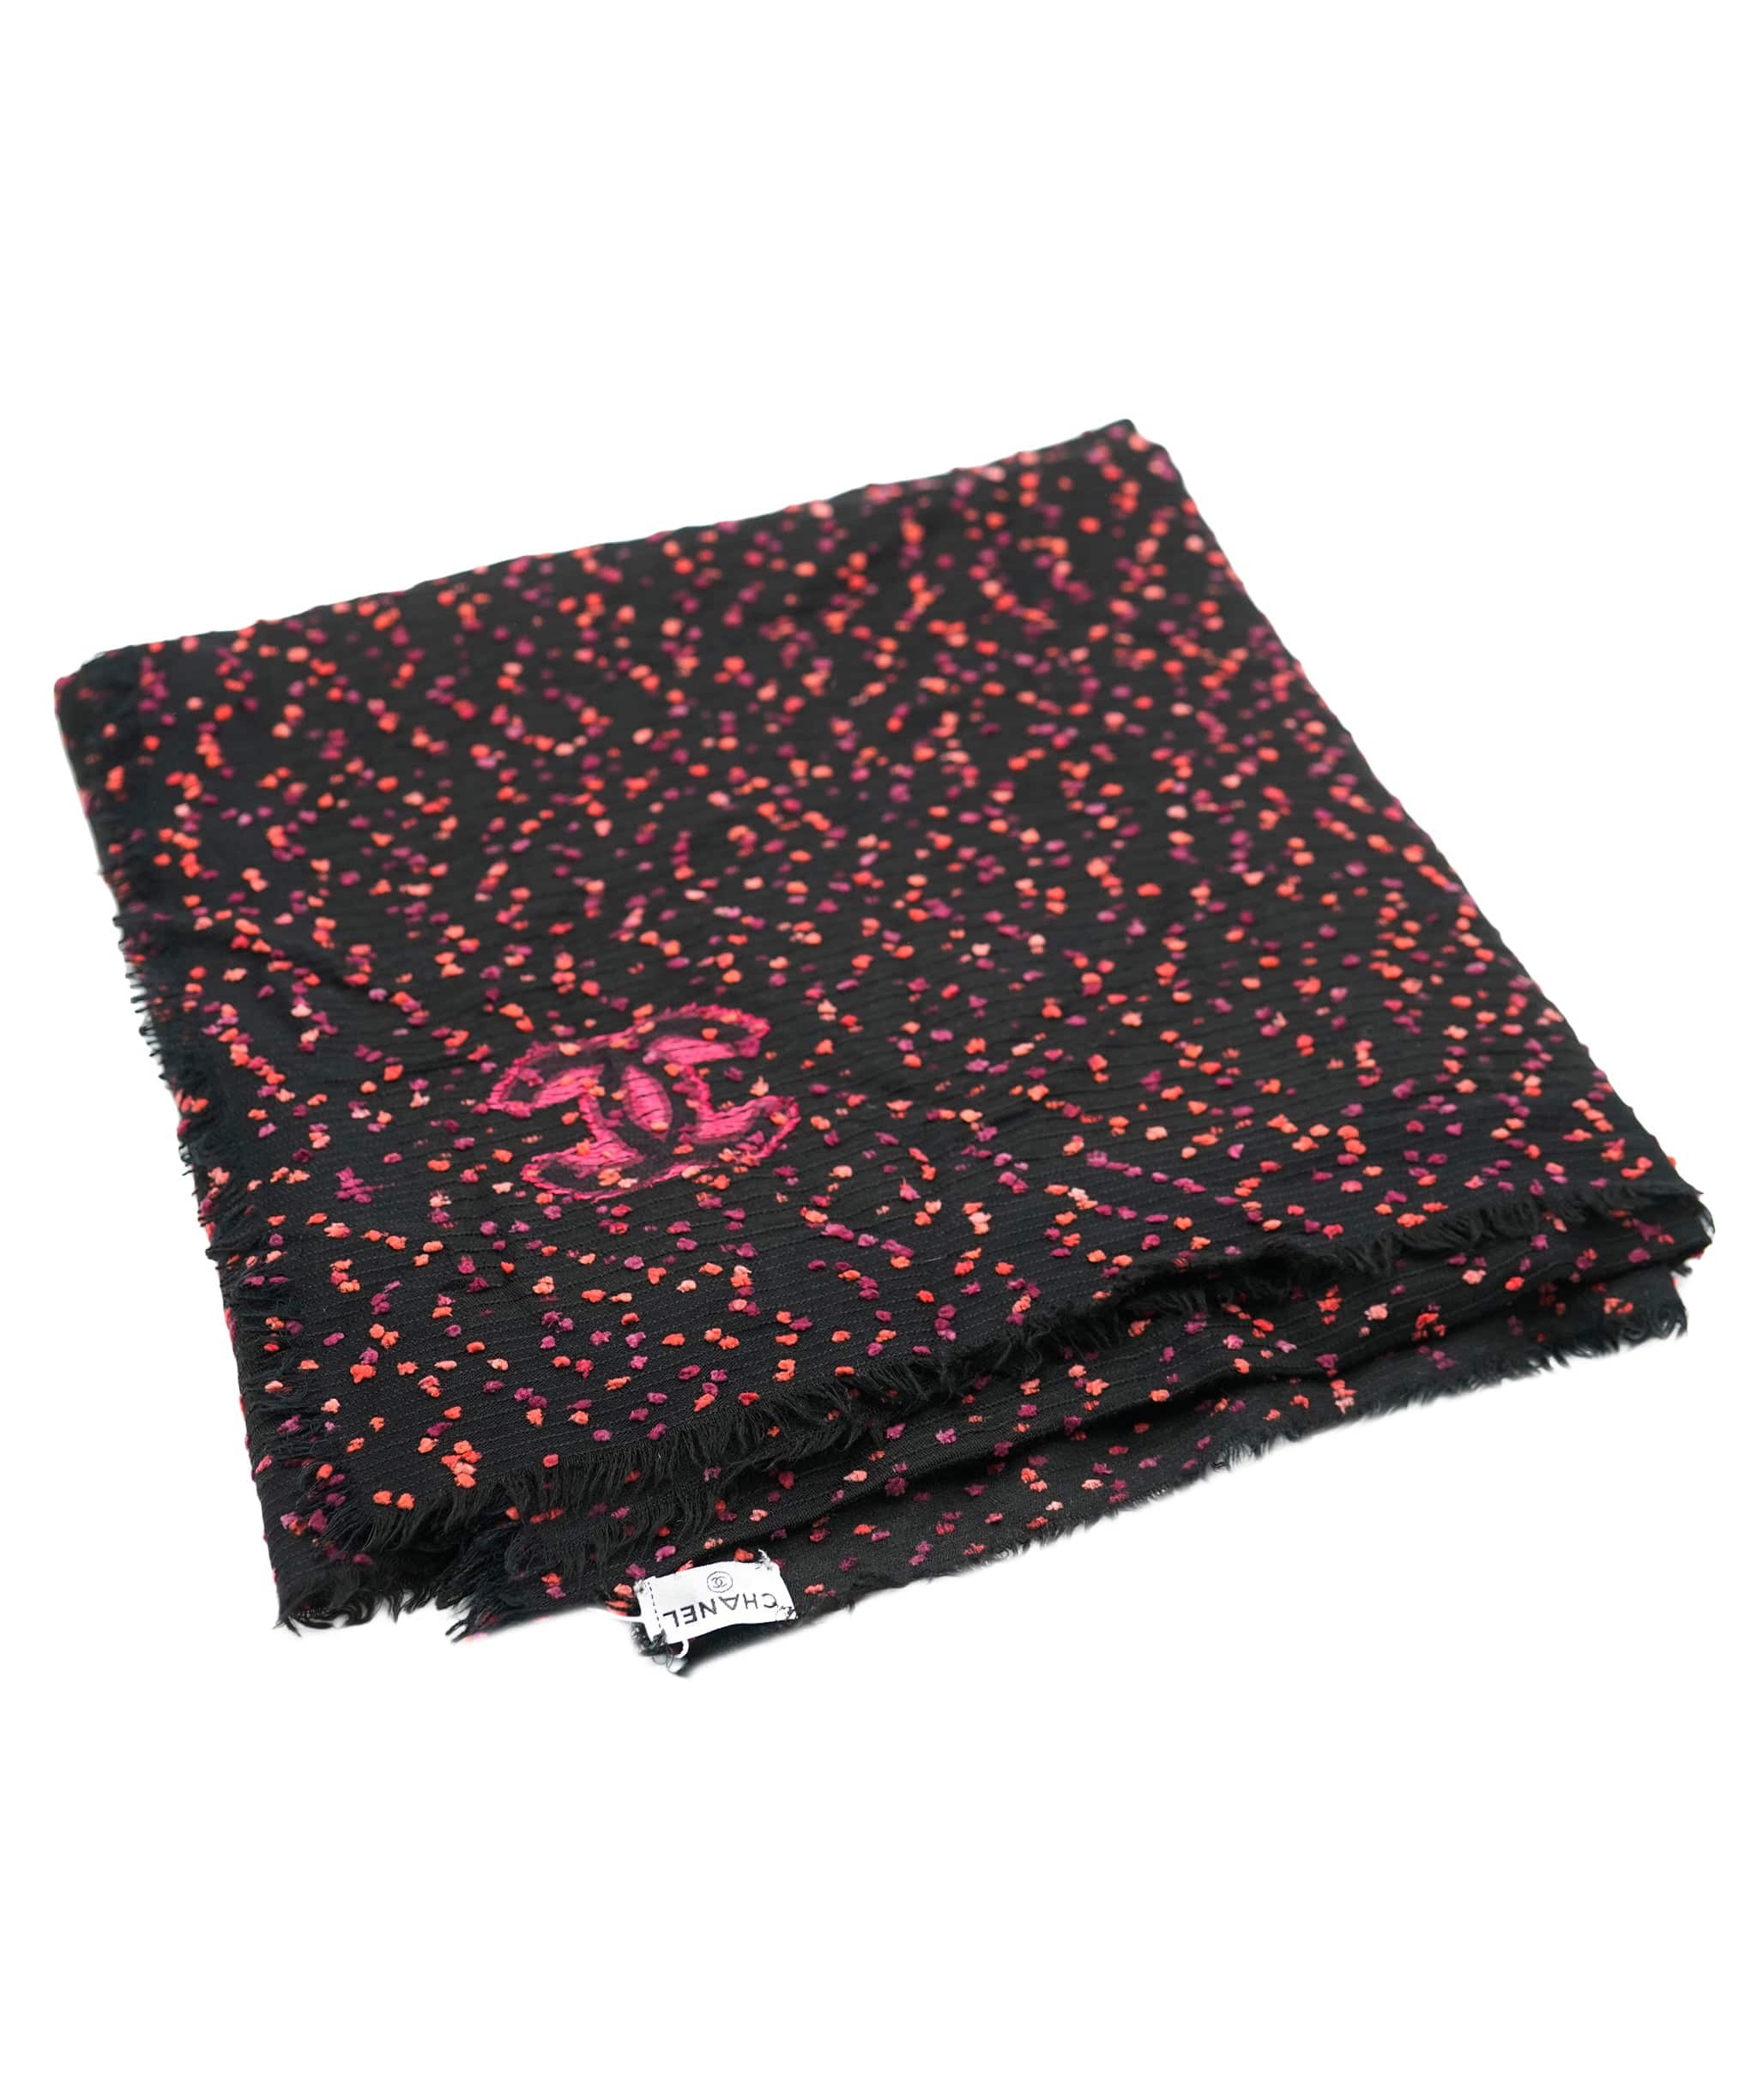 Chanel Chanel large scarf,140x140 cm black with pink spots, very good conditions,
dustbag ASL10037